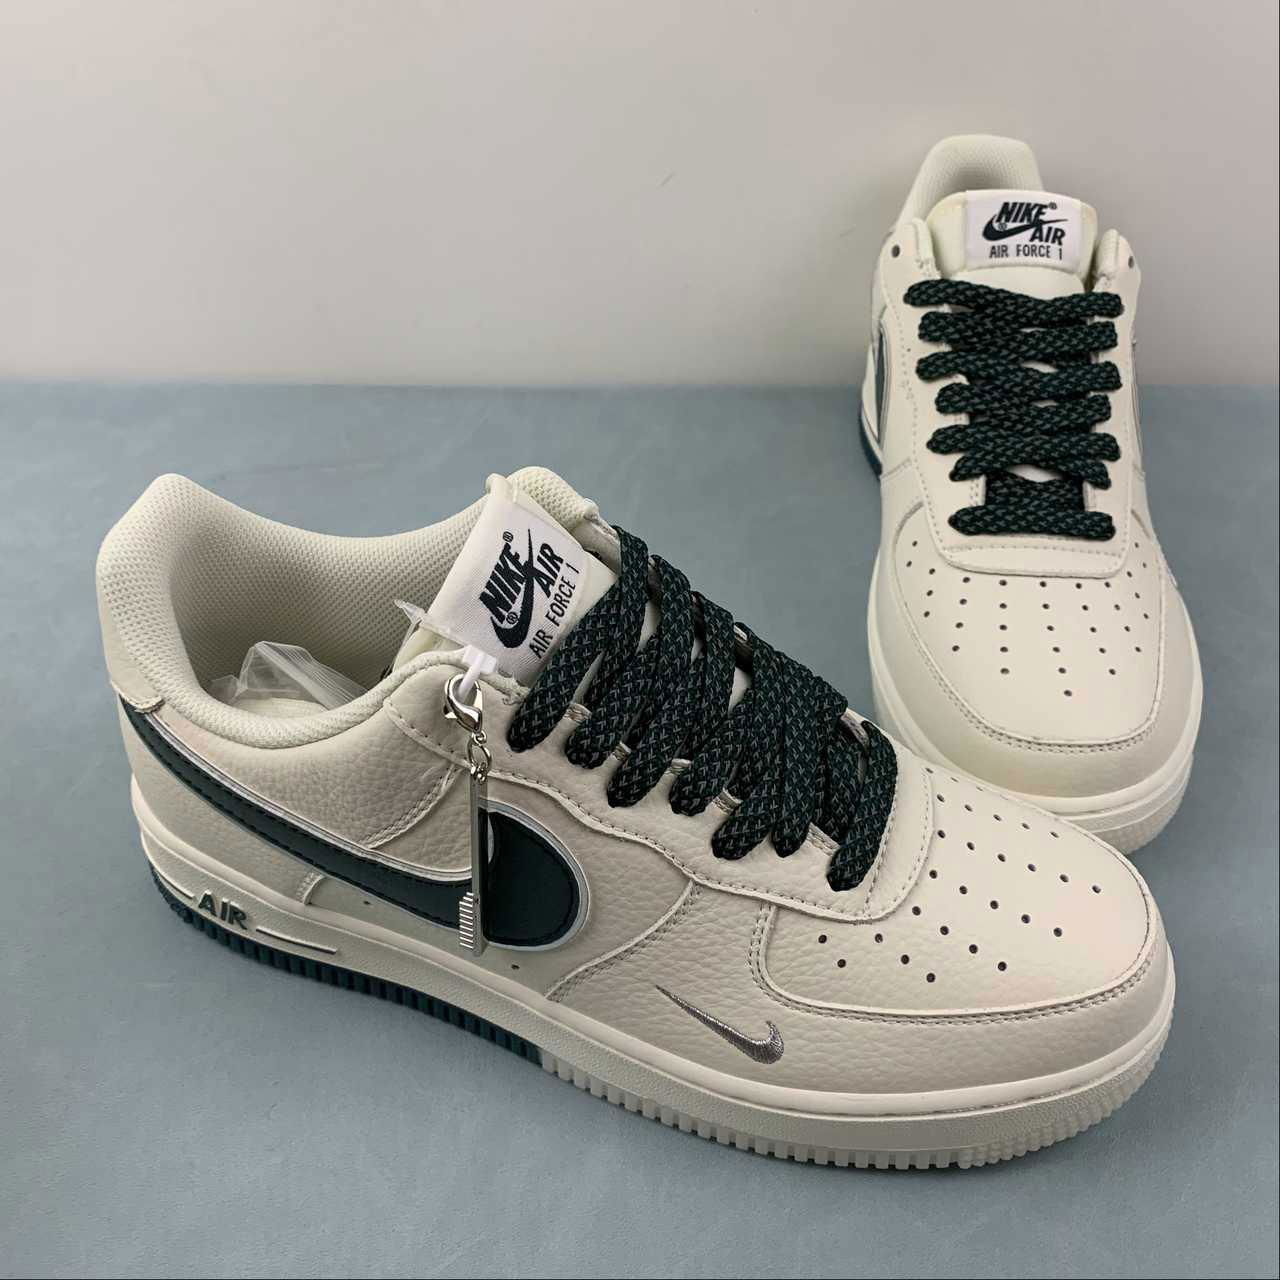      AIR FORCE 1 Air Force low-top casual shoes JJ0253-002